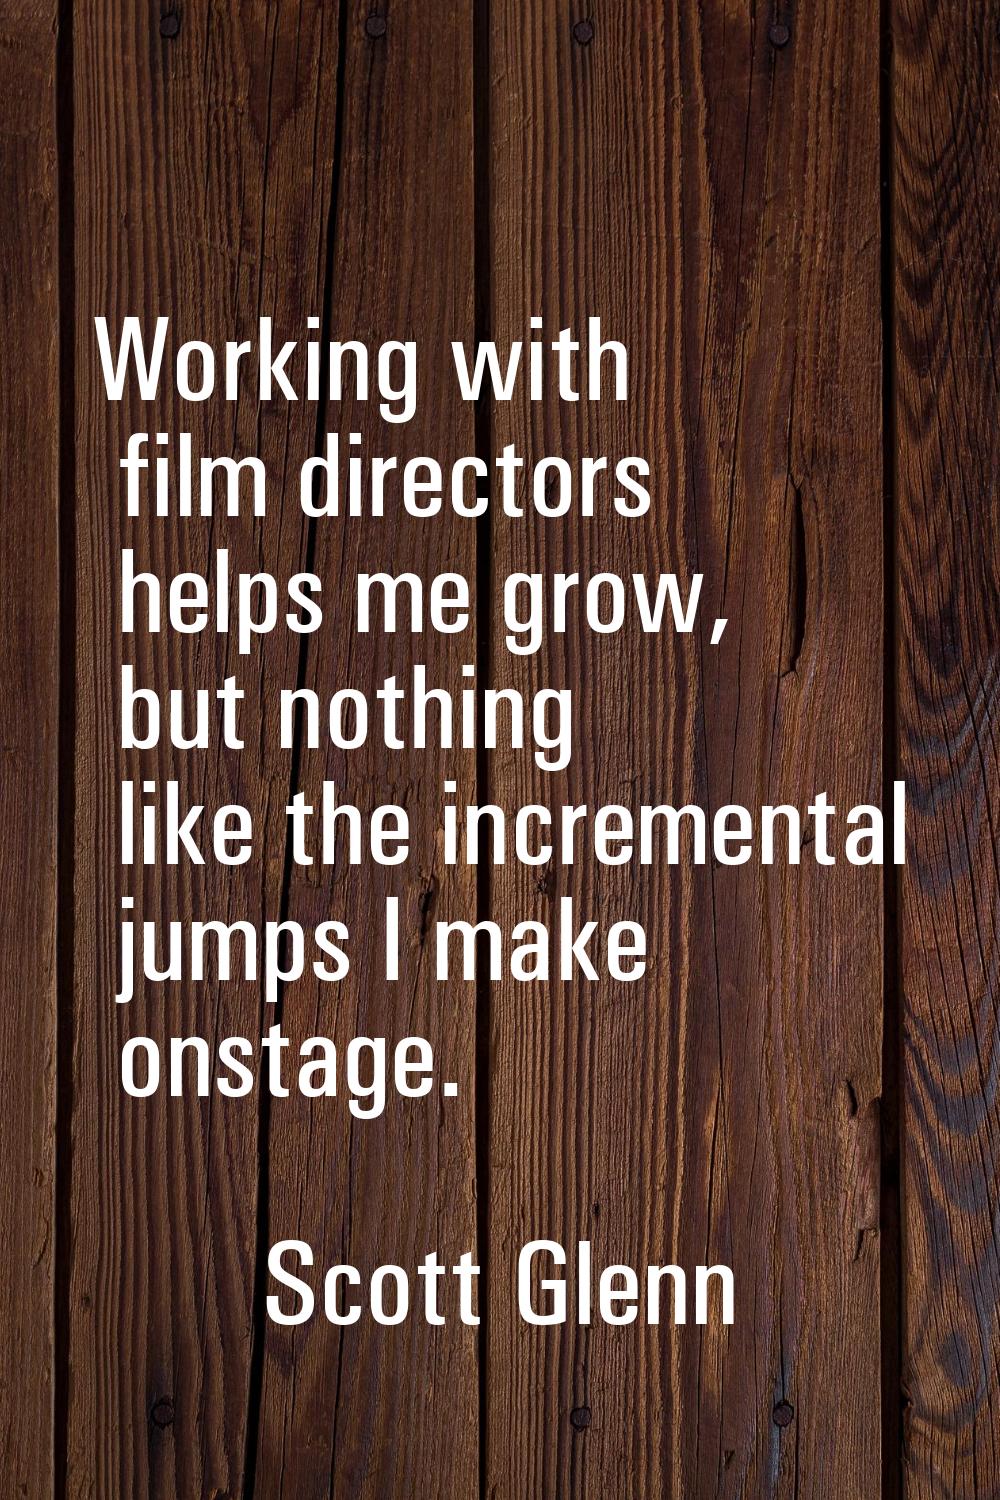 Working with film directors helps me grow, but nothing like the incremental jumps I make onstage.